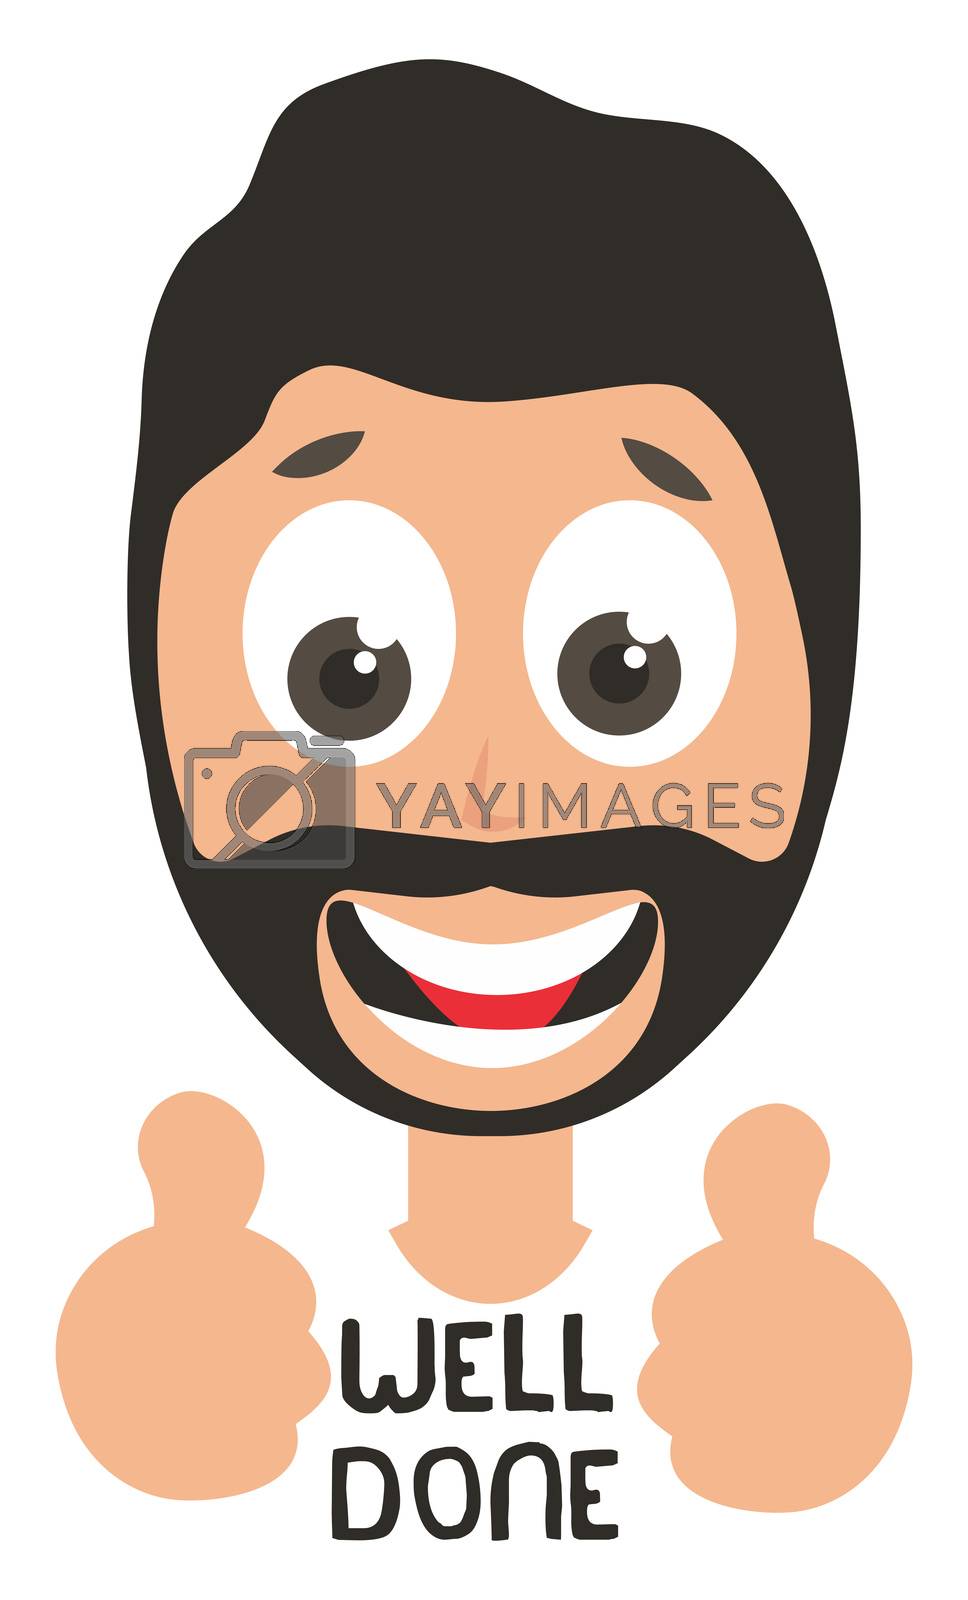 Royalty free image of Man well done emoji, illustration, vector on white background by Morphart